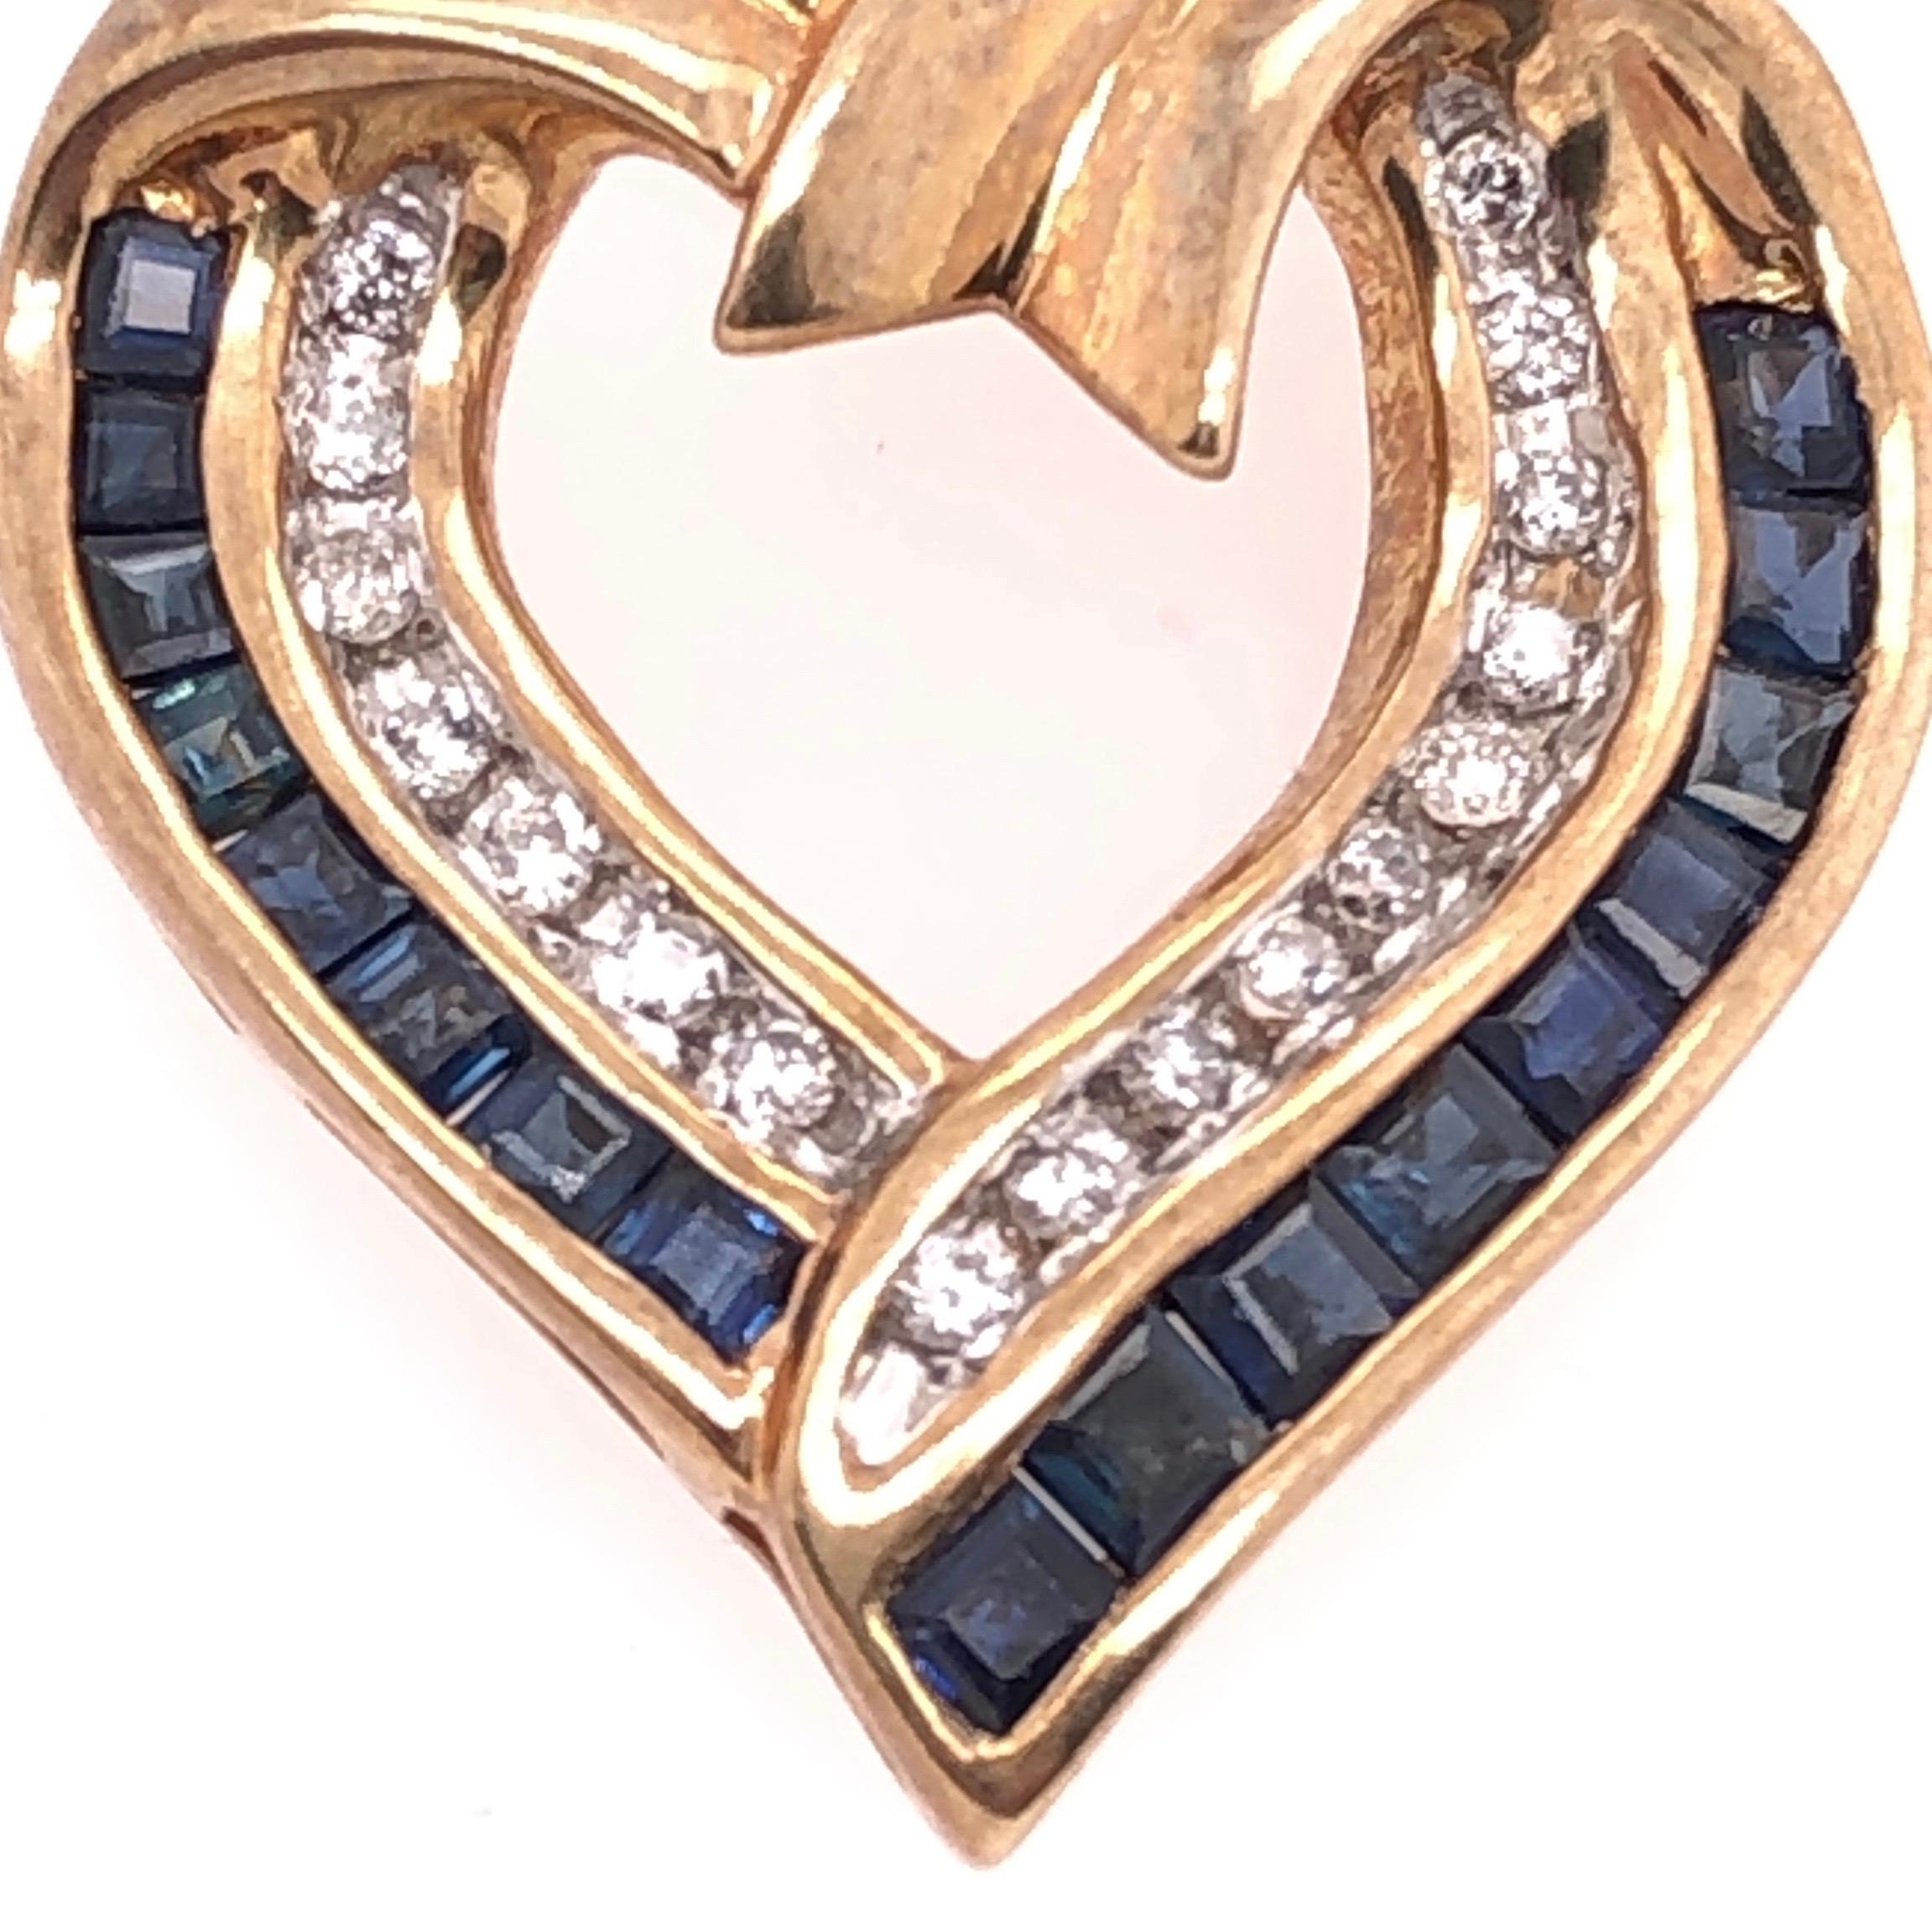 10 Karat Yellow Gold Charm/Heart Pendant with Blue Sapphires and Diamonds.
4.1 grams total weight.